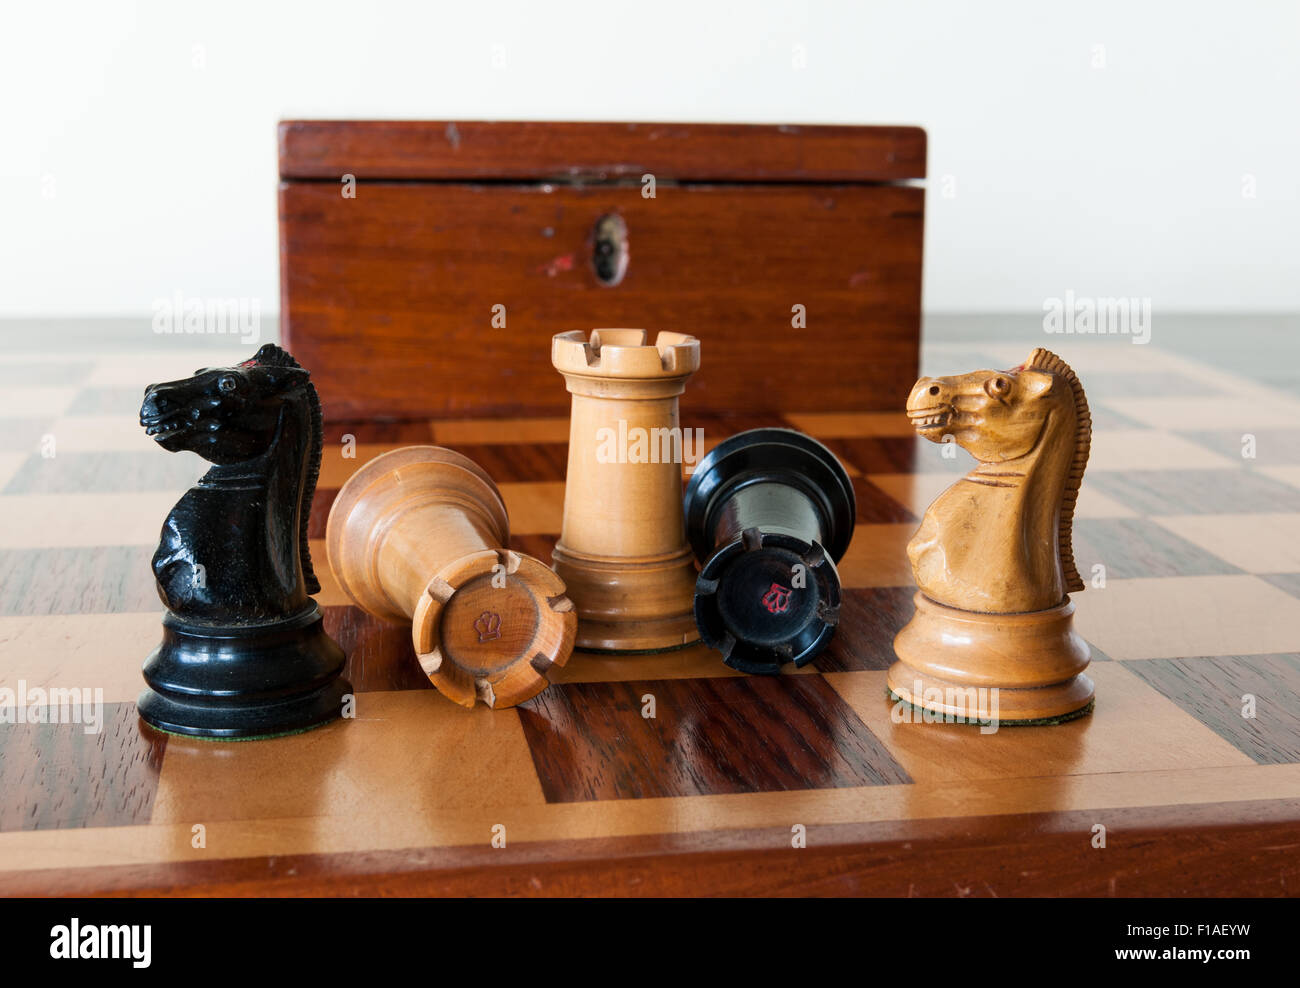 Black and white rooks and knights chess pieces from the 1800s on a chess board with a chess box in the background. Stock Photo